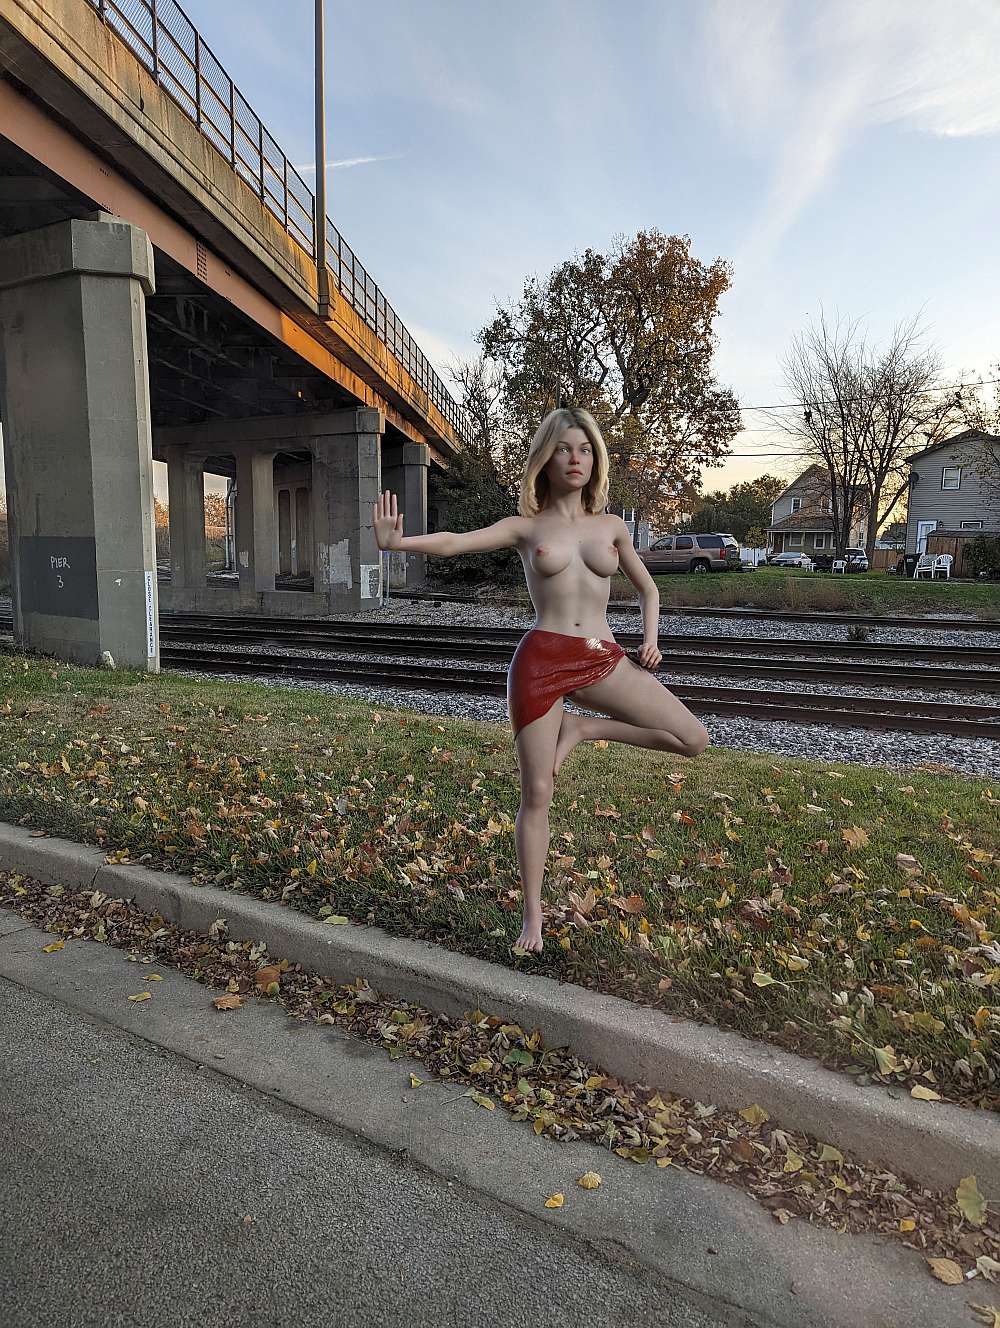 Naked woman in yoga pose outside next to a road and train tracks